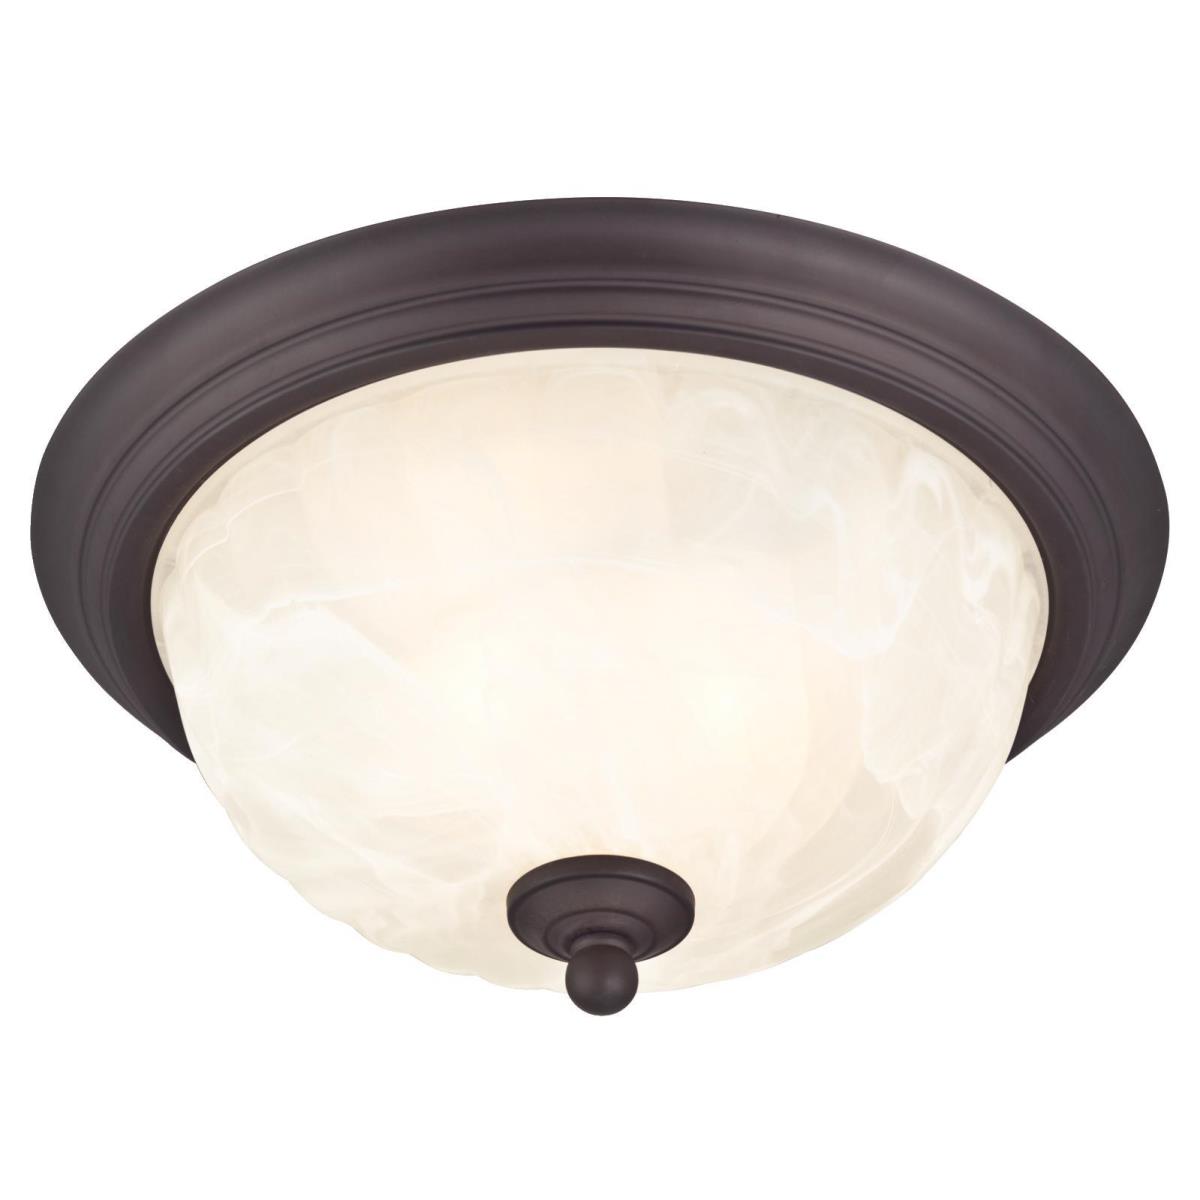 2 Light Flush Oil Rubbed Bronze Finish with White Alabaster Glass